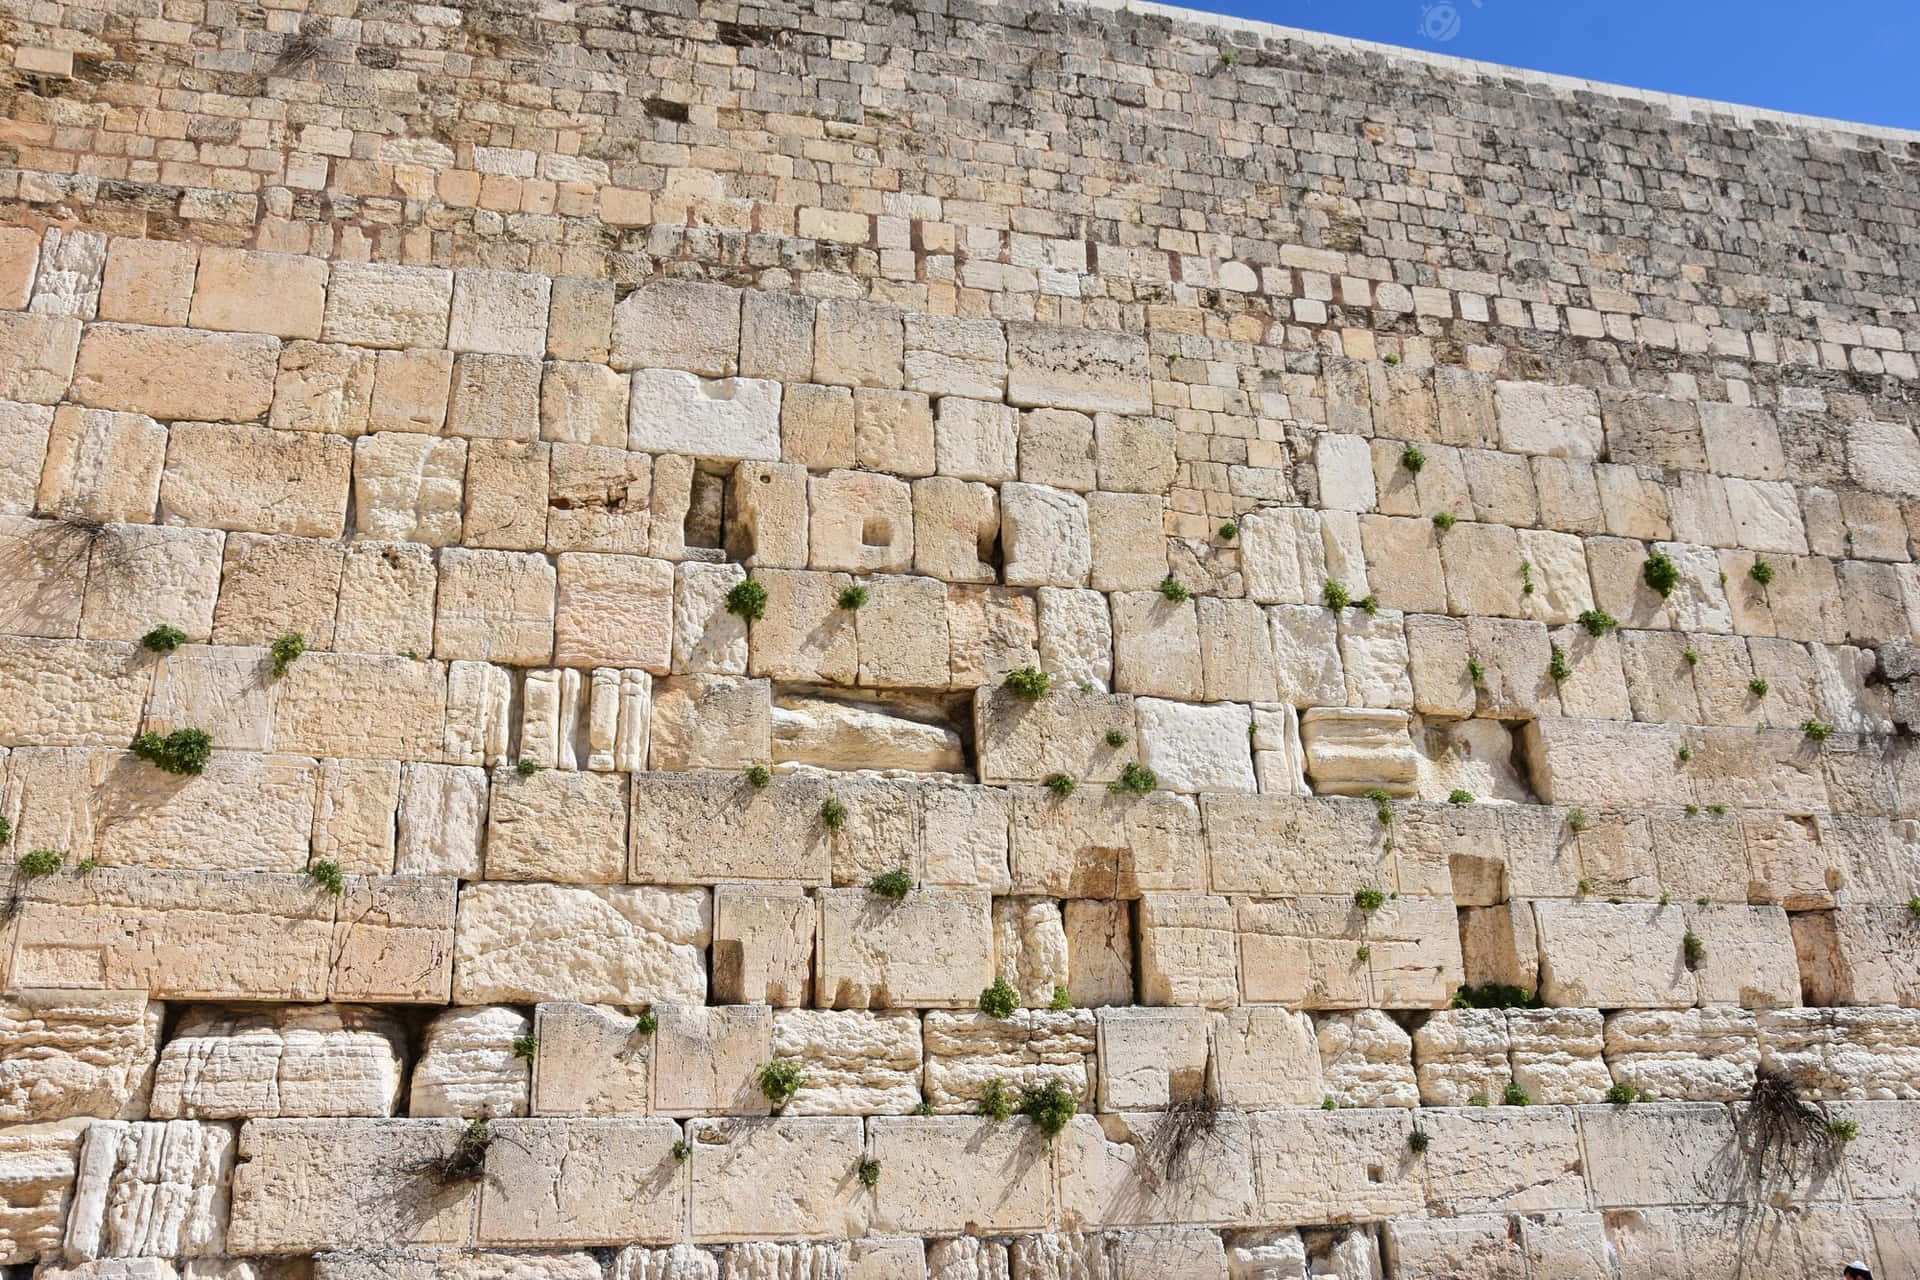 Judiskarötter Västra Muren (this Translation Refers To The Iconic Jewish Holy Site Commonly Known As The Western Wall, Or The Wailing Wall In English. It Would Make A Suitable Subject For A Wallpaper Design.) Wallpaper